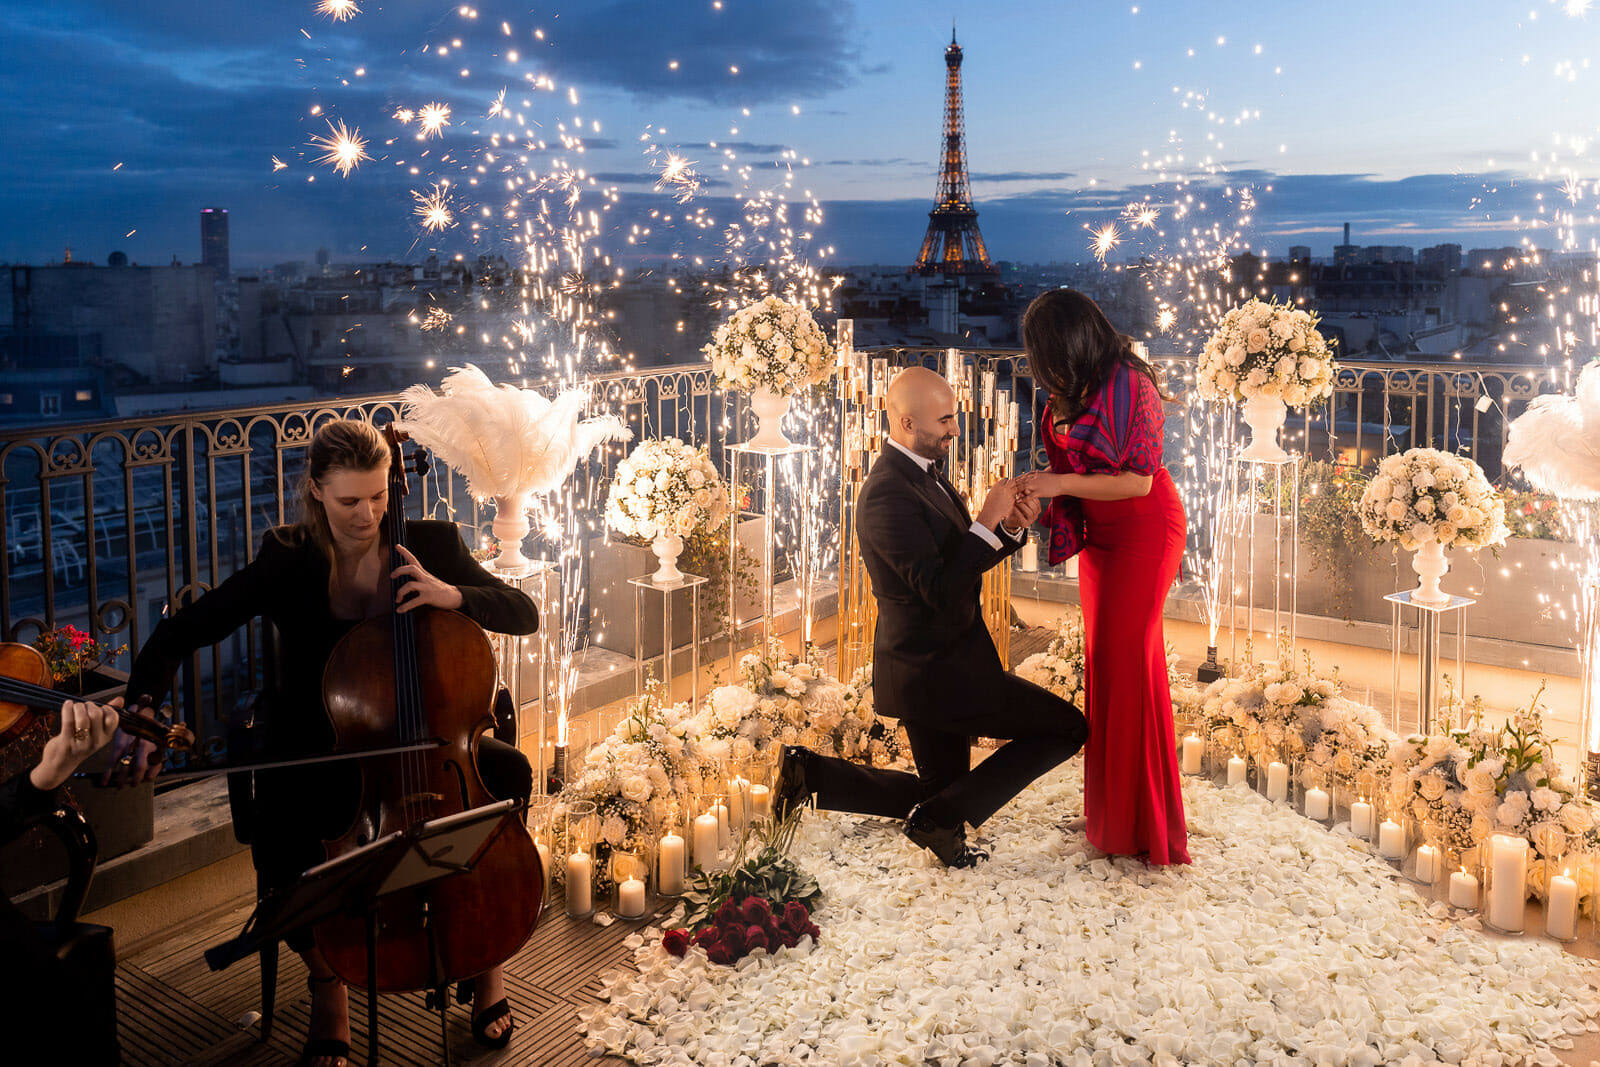 Epic Eiffel Tower Proposal with fireworks fountains, candles, white roses, and musicians